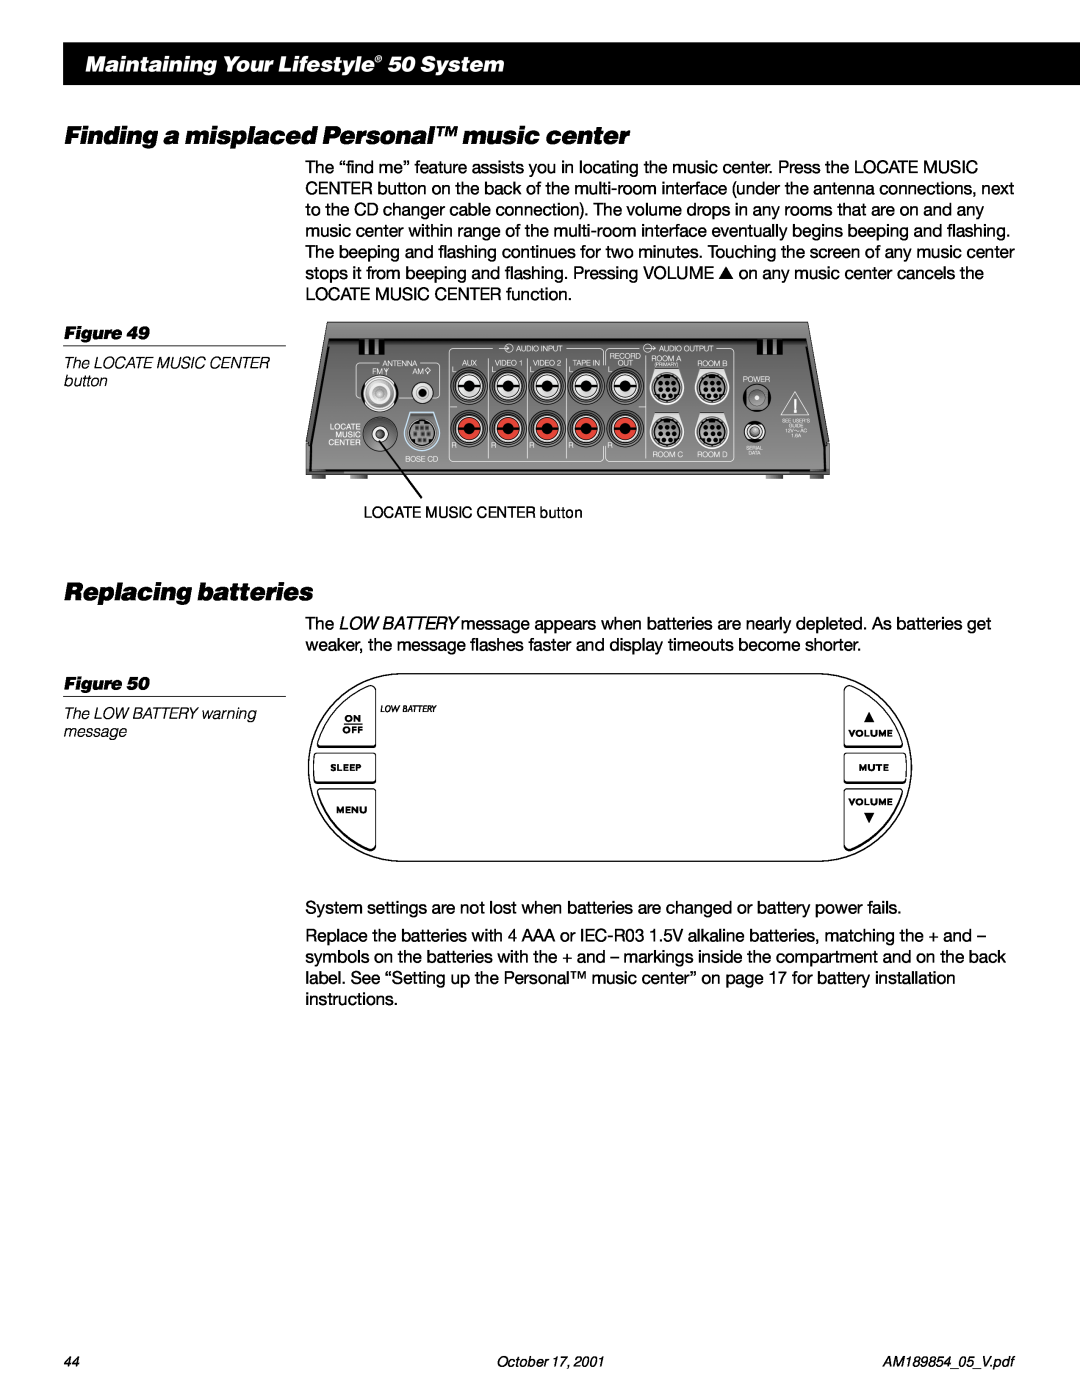 Bose manual Finding a misplaced Personal music center, Replacing batteries, Maintaining Your Lifestyle 50 System 